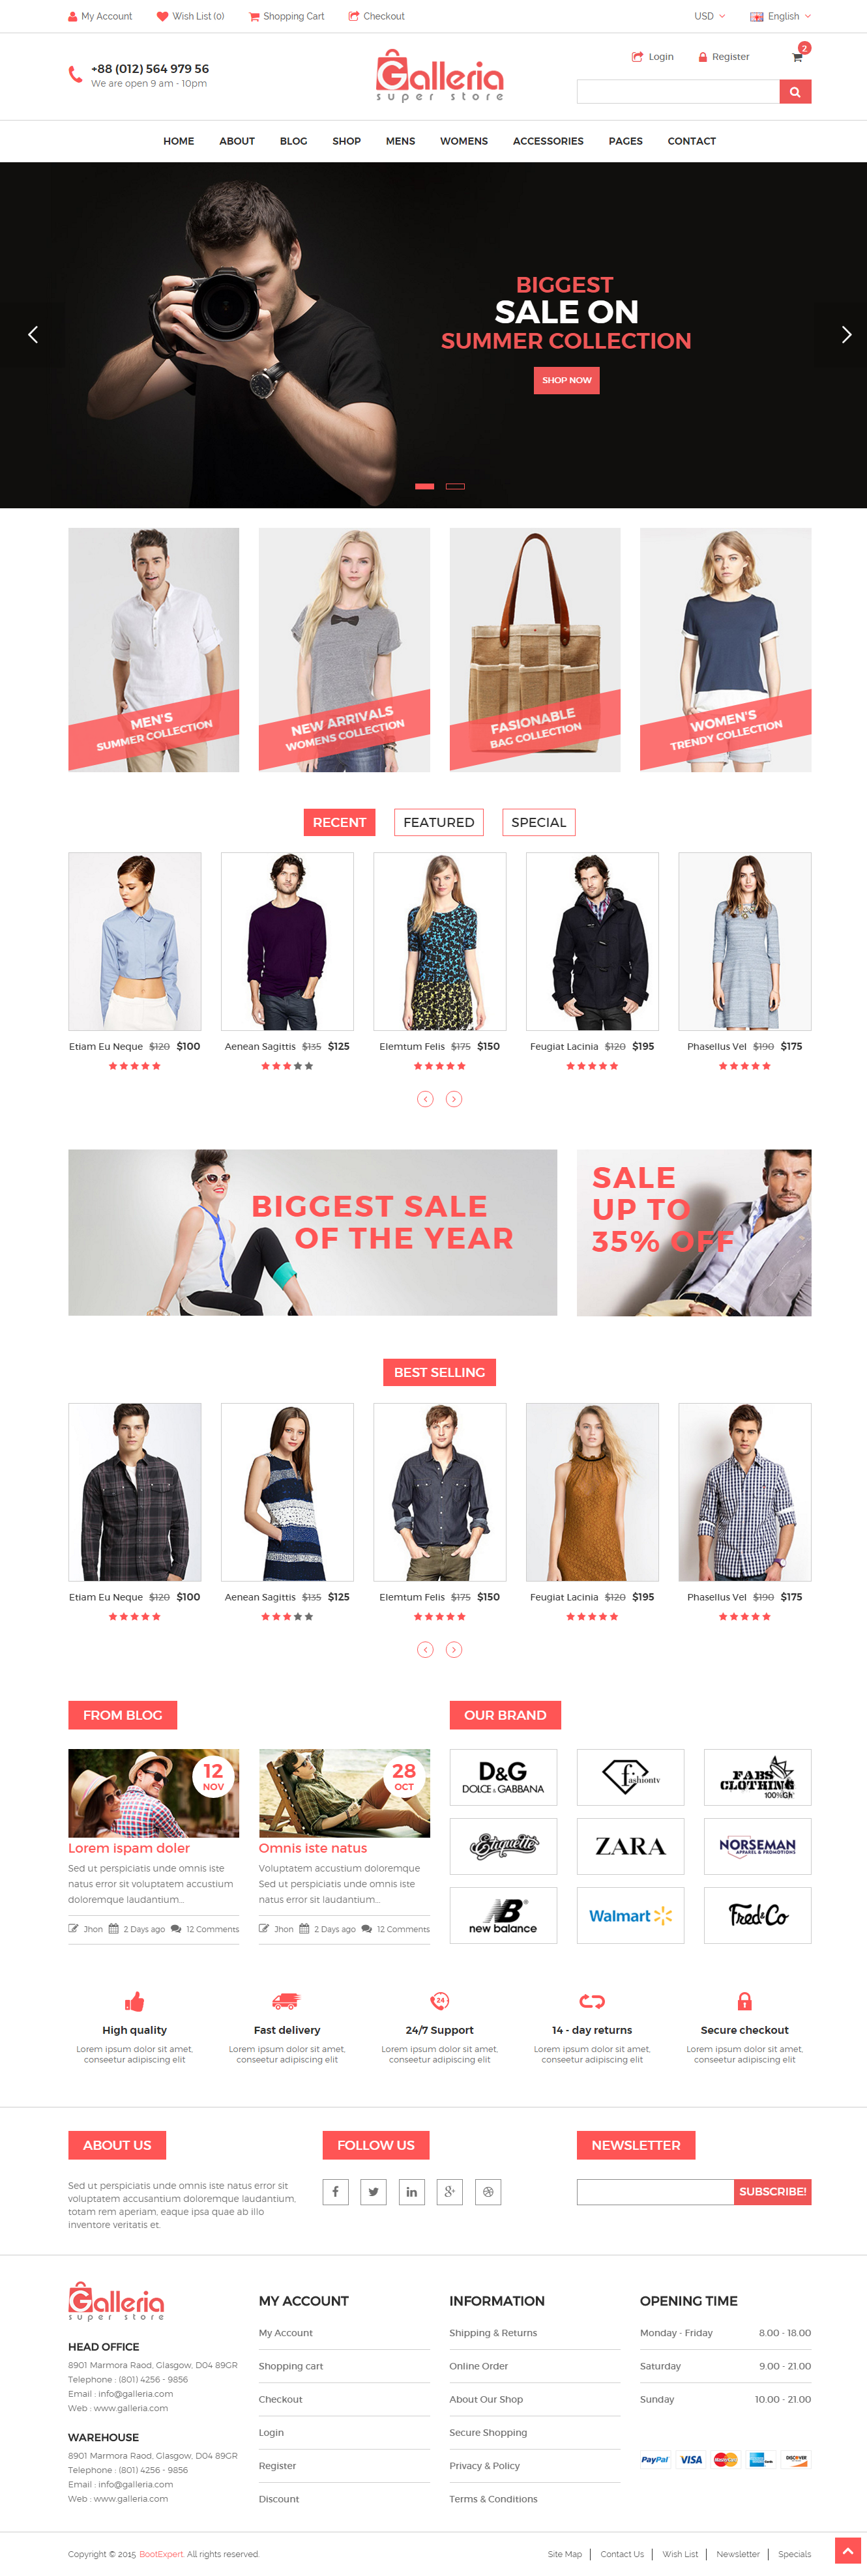 Galleria – Bootstrap eCommerce Template by DevItems on Dribbble